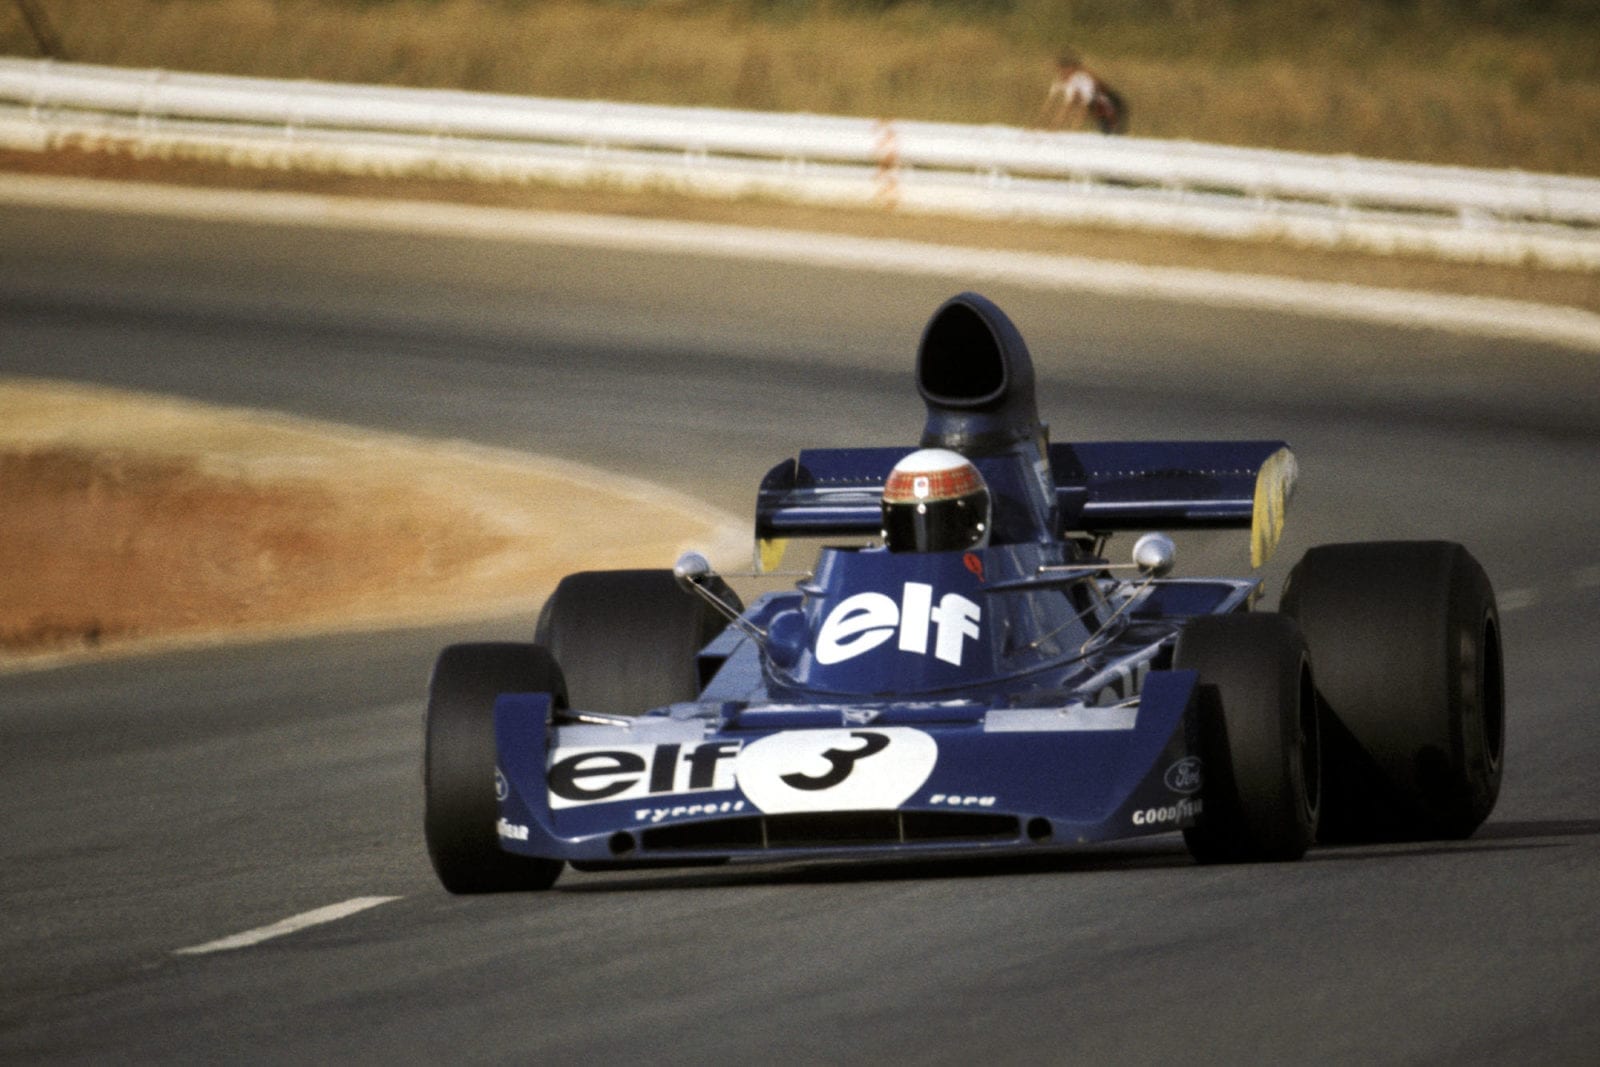 Jackie Stewart driving for Tyrrell at the 1973 South African Grand Prix